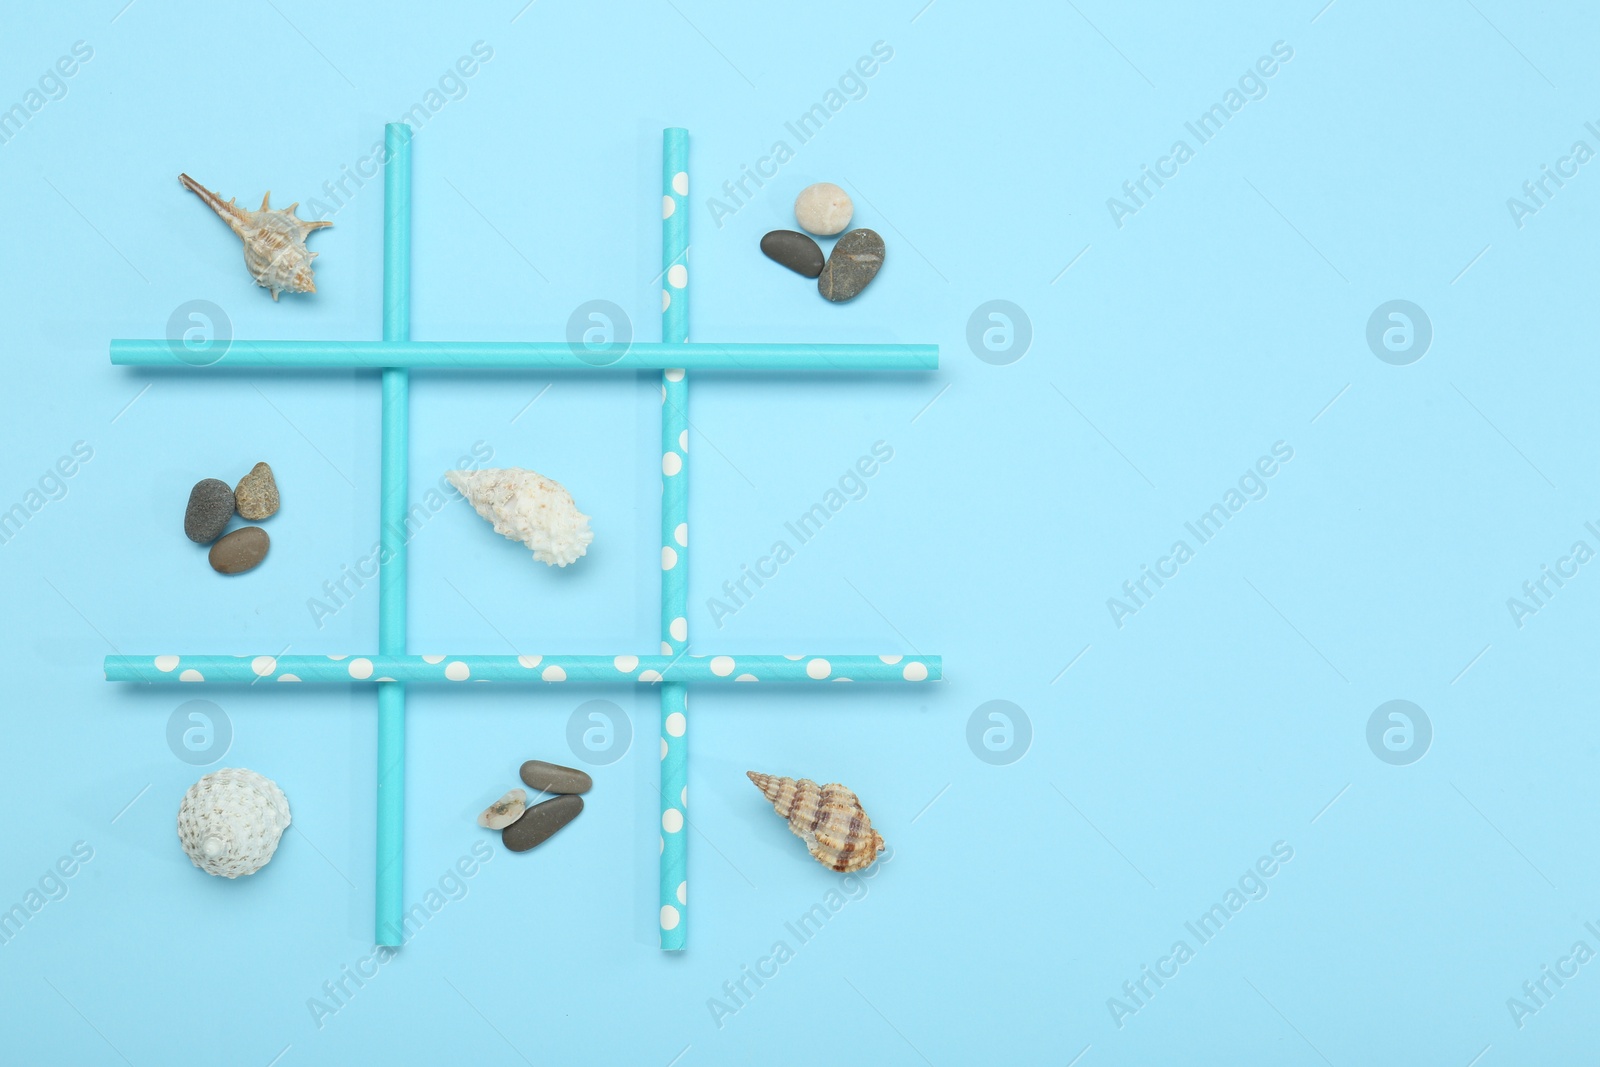 Photo of Tic tac toe game made with sea treasures on light blue background, top view